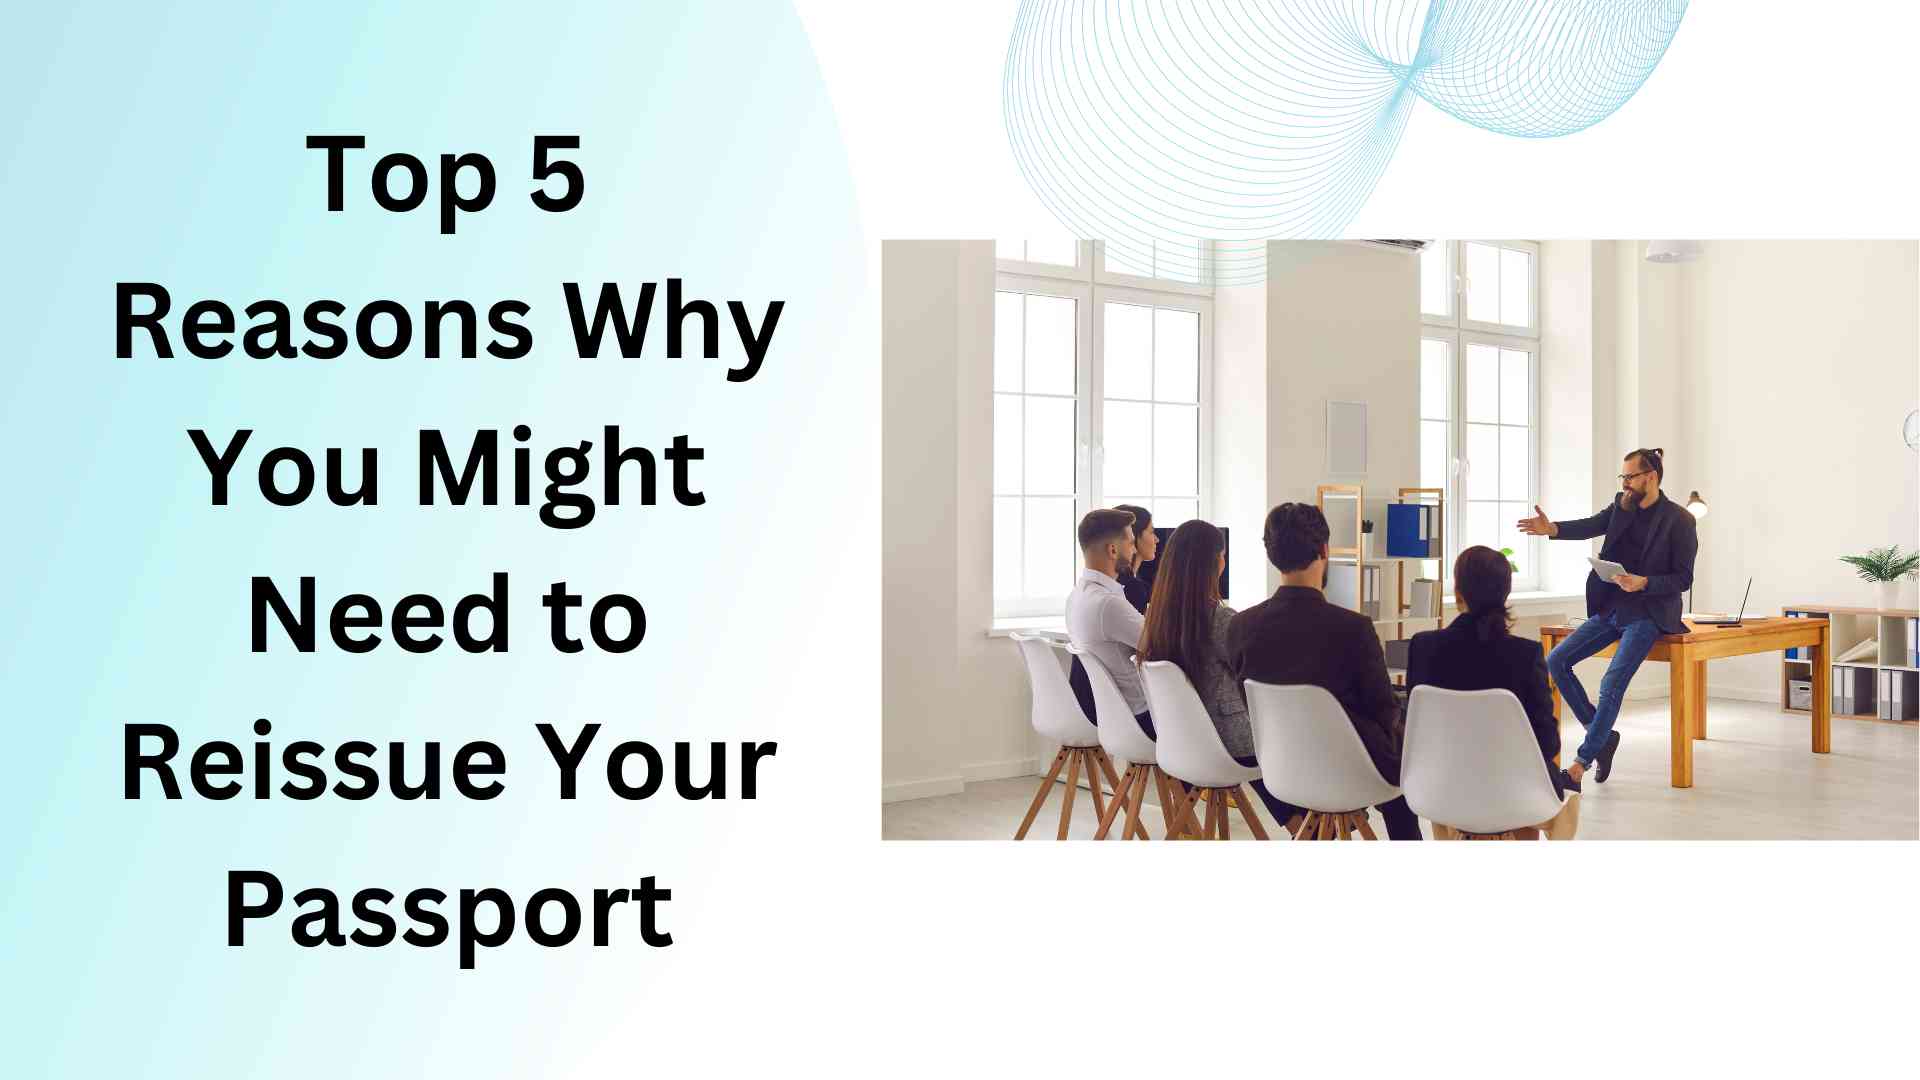 Top 5 Reasons Why You Might Need to Reissue Your Passport